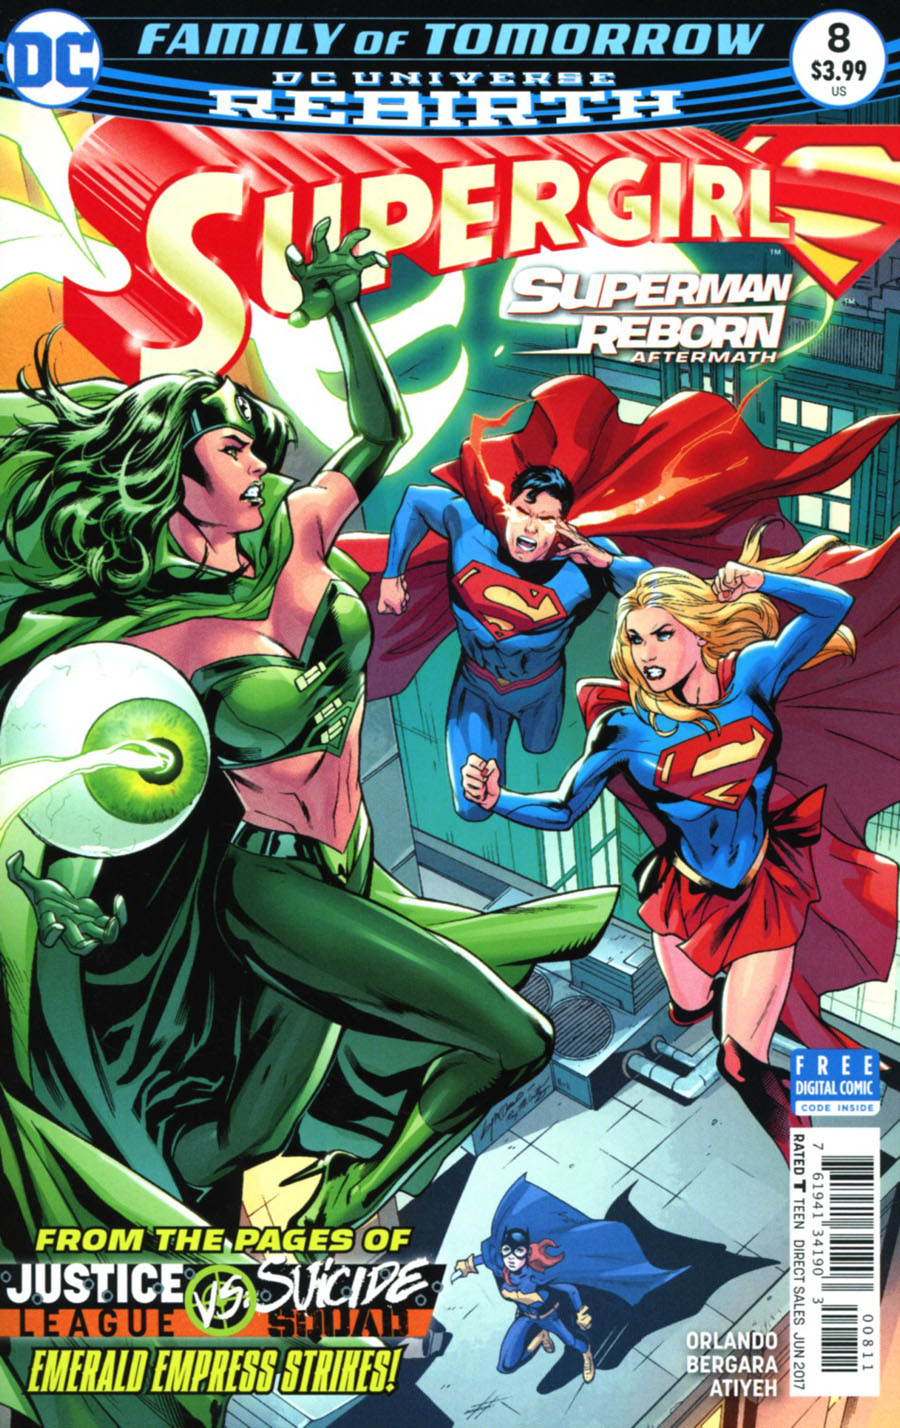 Supergirl Vol 7 #8 Cover A Regular Emanuela Lupacchino & Ray McCarthy Cover (Superman Reborn Aftermath Tie-In)